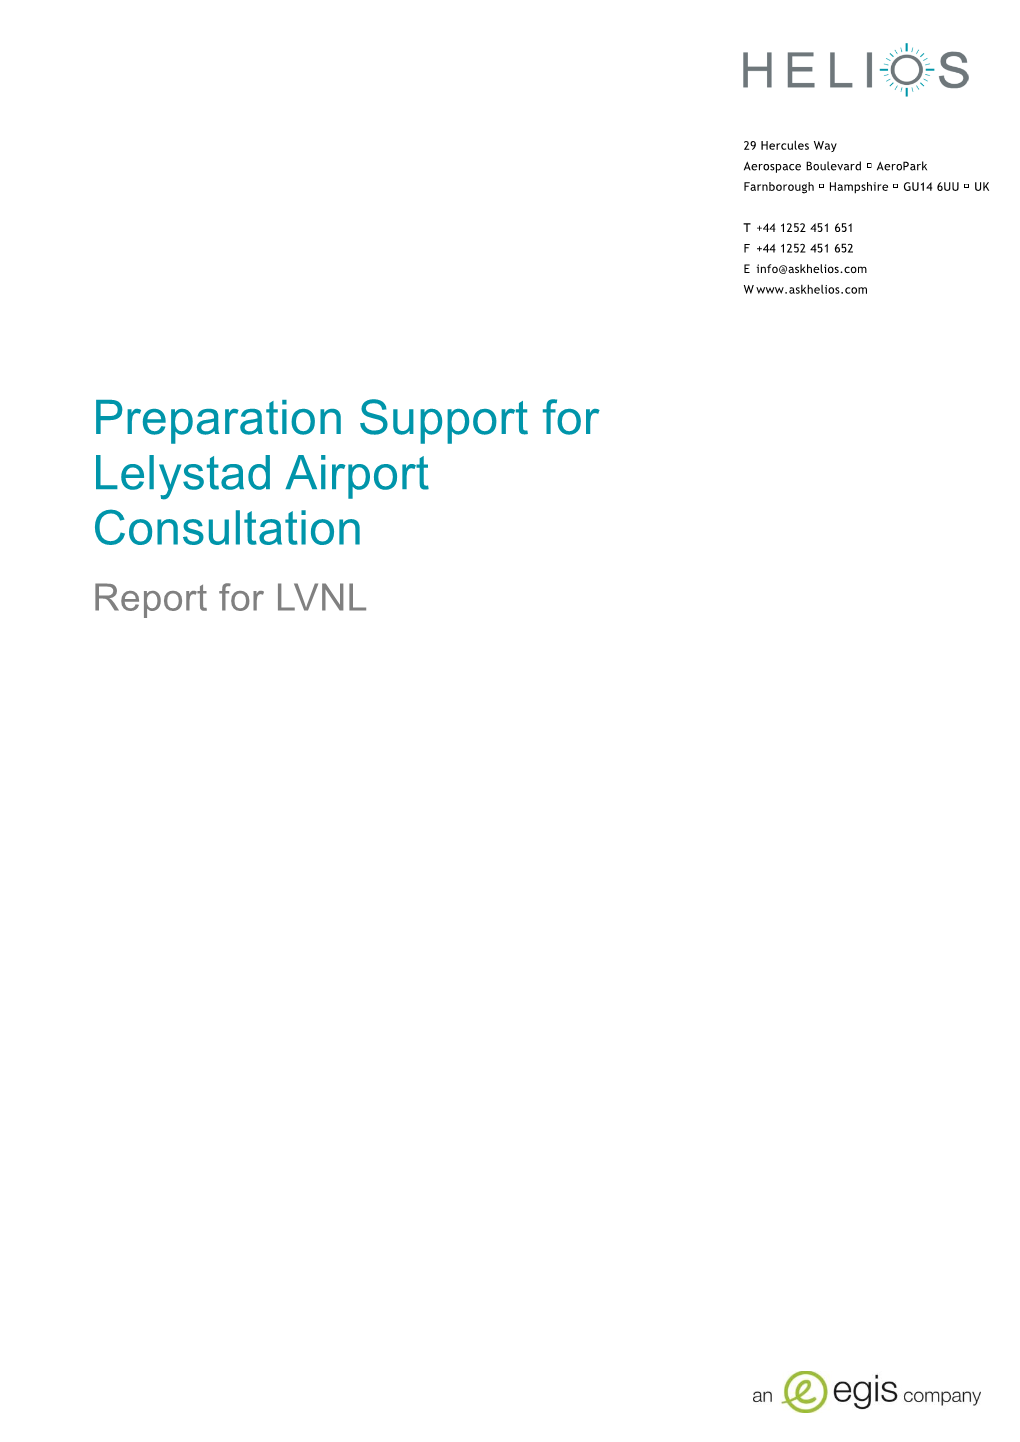 Preparation Support for Lelystad Airport Consultation Document Title Report for LVNL